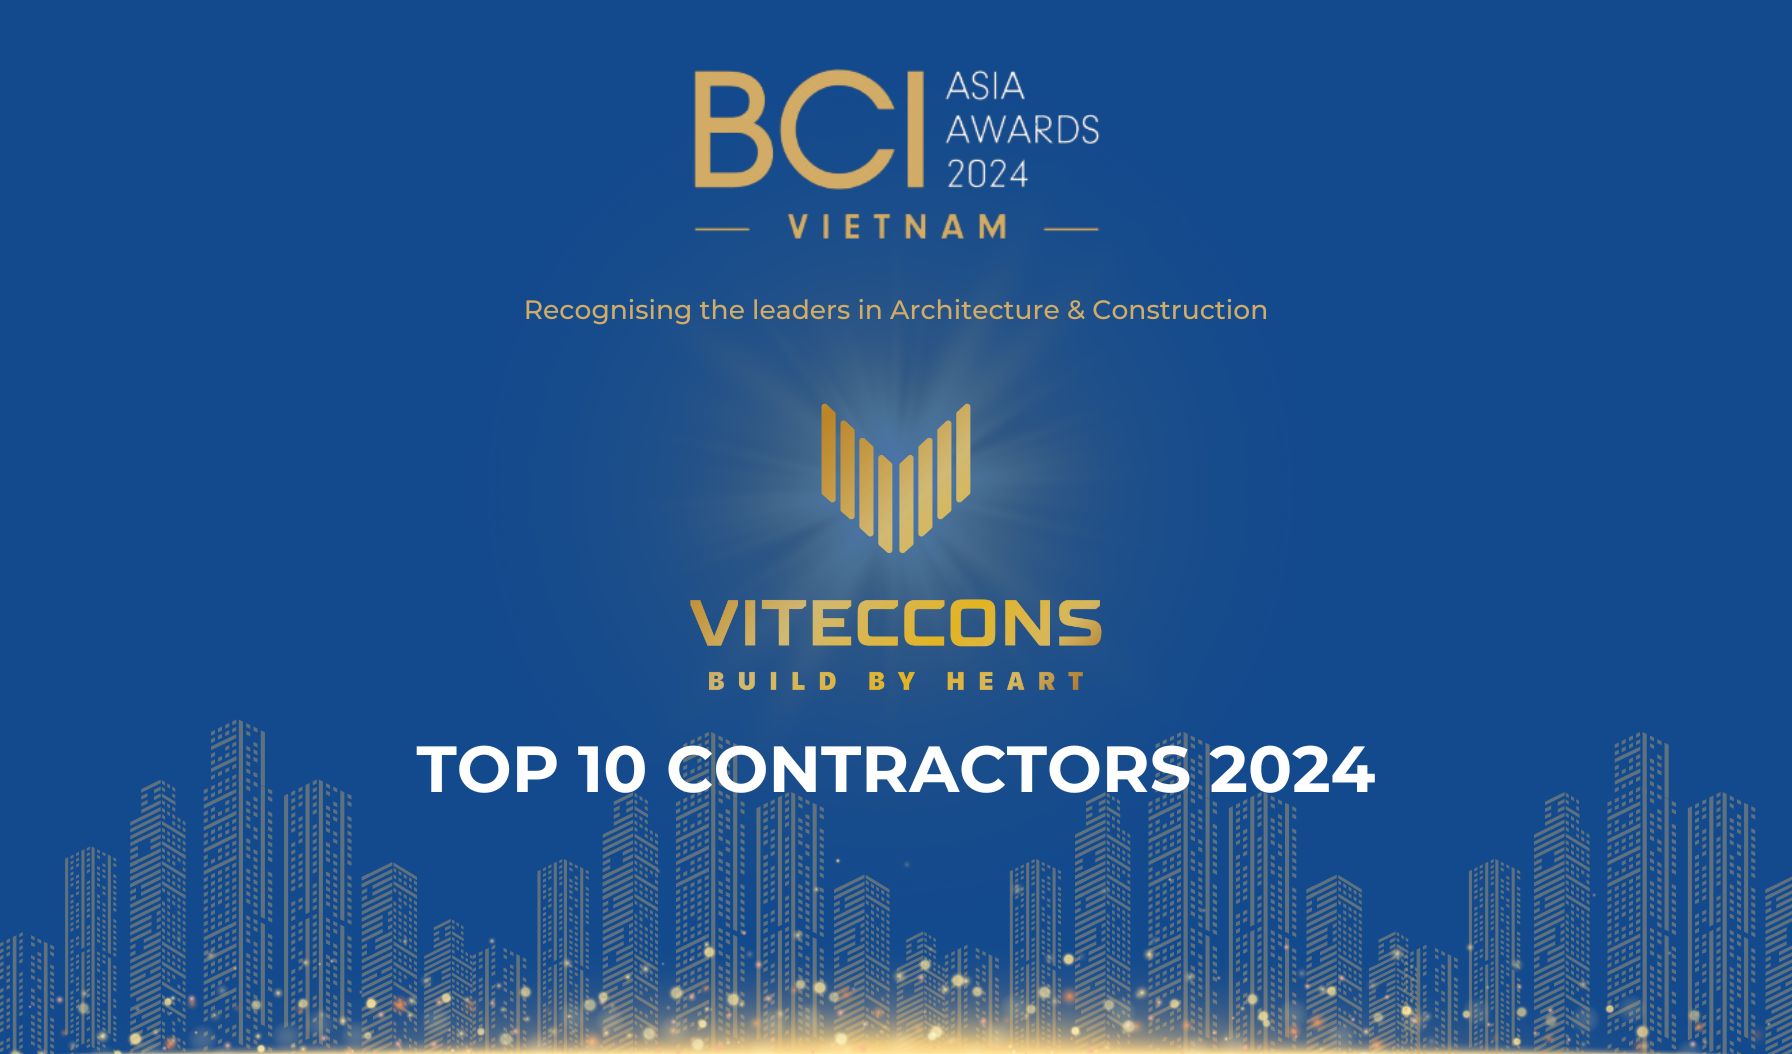 CONGRATULATIONS TO VITECCONS FOR MAKING IT INTO THE TOP 10 CONTRACTORS IN VIETNAM AT THE BCI ASIA AWARDS 2024!